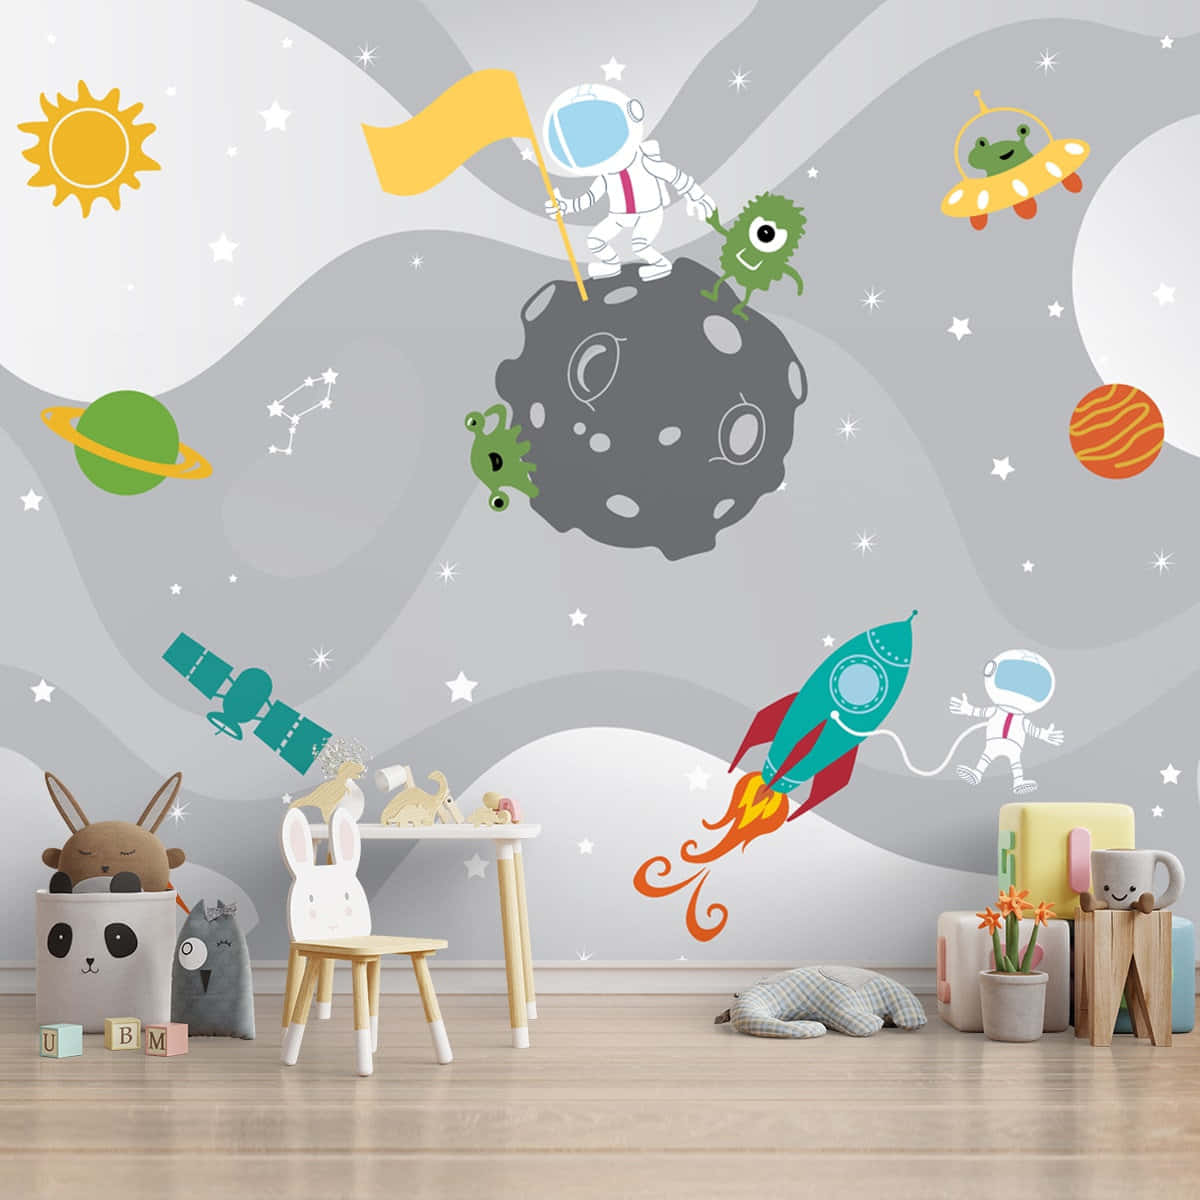 Travel Across Galaxies With This Ultra-cute Astronaut!